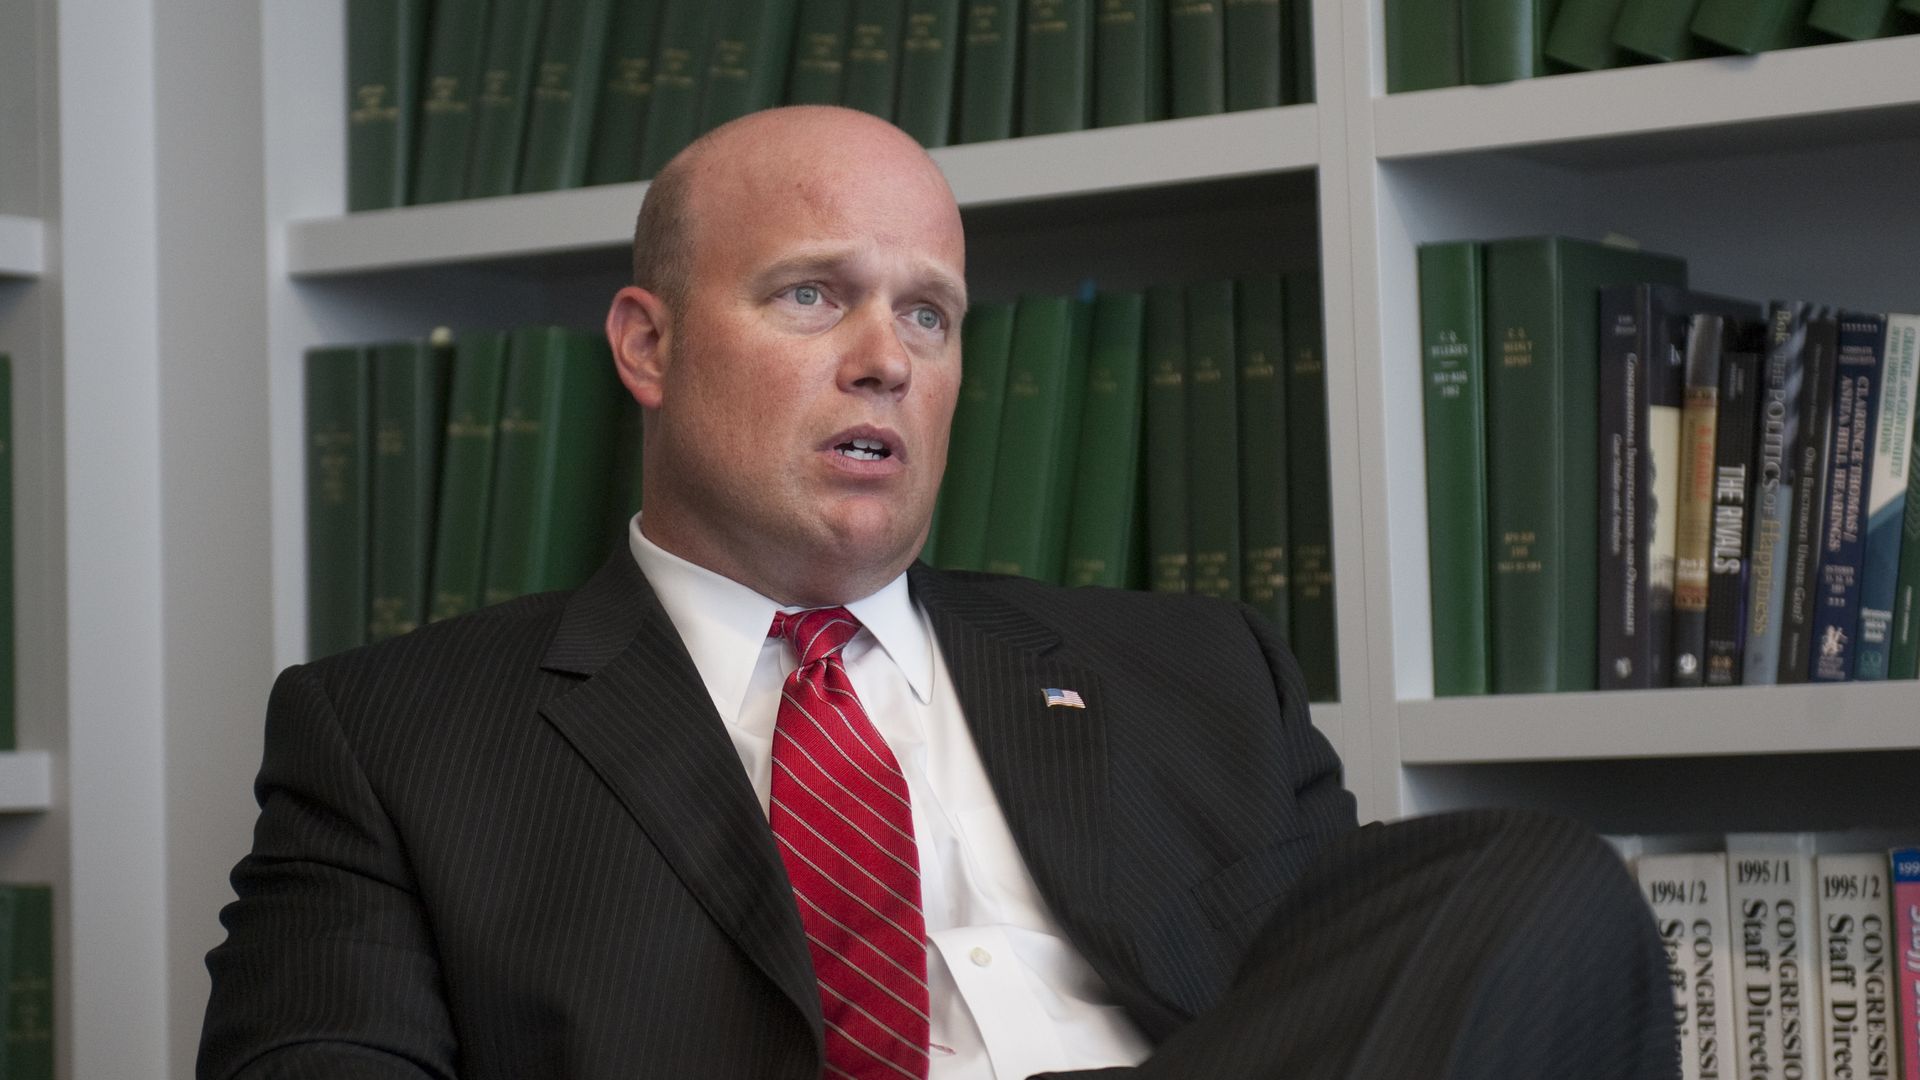 Matthew Whitaker looks concerned.